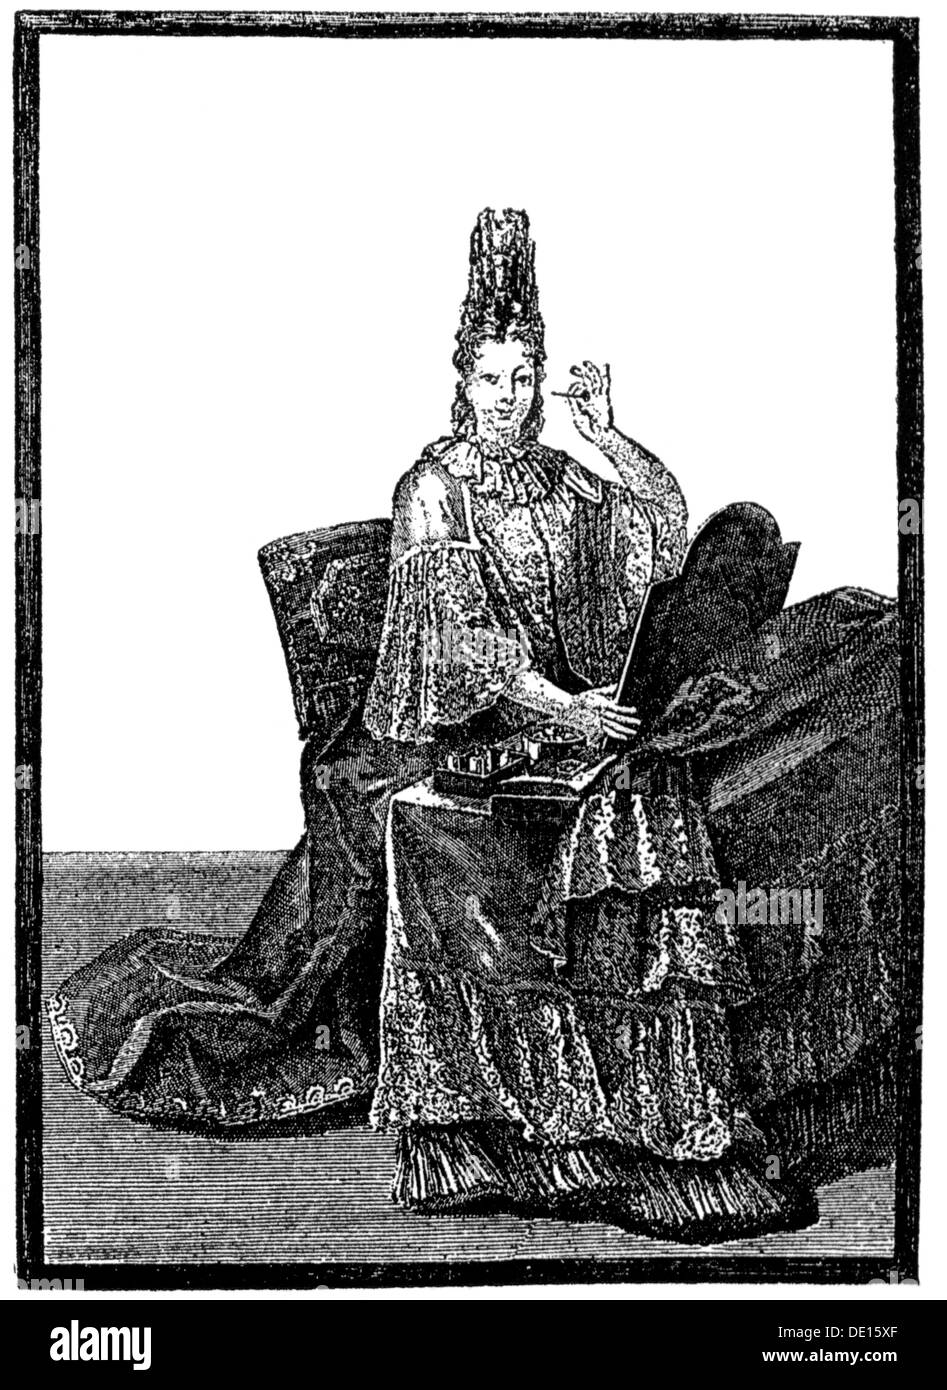 fashion, 17th century, lady-in-waiting at morning toilet, copper engraving, France, second half 17th century, 17th century, graphic, graphics, baroque, aristocracy, aristocracies, noble woman, noble women, nobles, clothes, outfit, outfits, aristocrat, ladies' fashion, full length, sitting, sit, chair, chairs, table, tables, cosmetics, cosmetic, beauty care, beauty, beauties, belle, belles, mirror, mirrors, make oneself up, making oneself up, putting on make-up, made oneself up, put on make-up, painting, paint, fashion for women, women's clothing, lady-, Artist's Copyright has not to be cleared Stock Photo